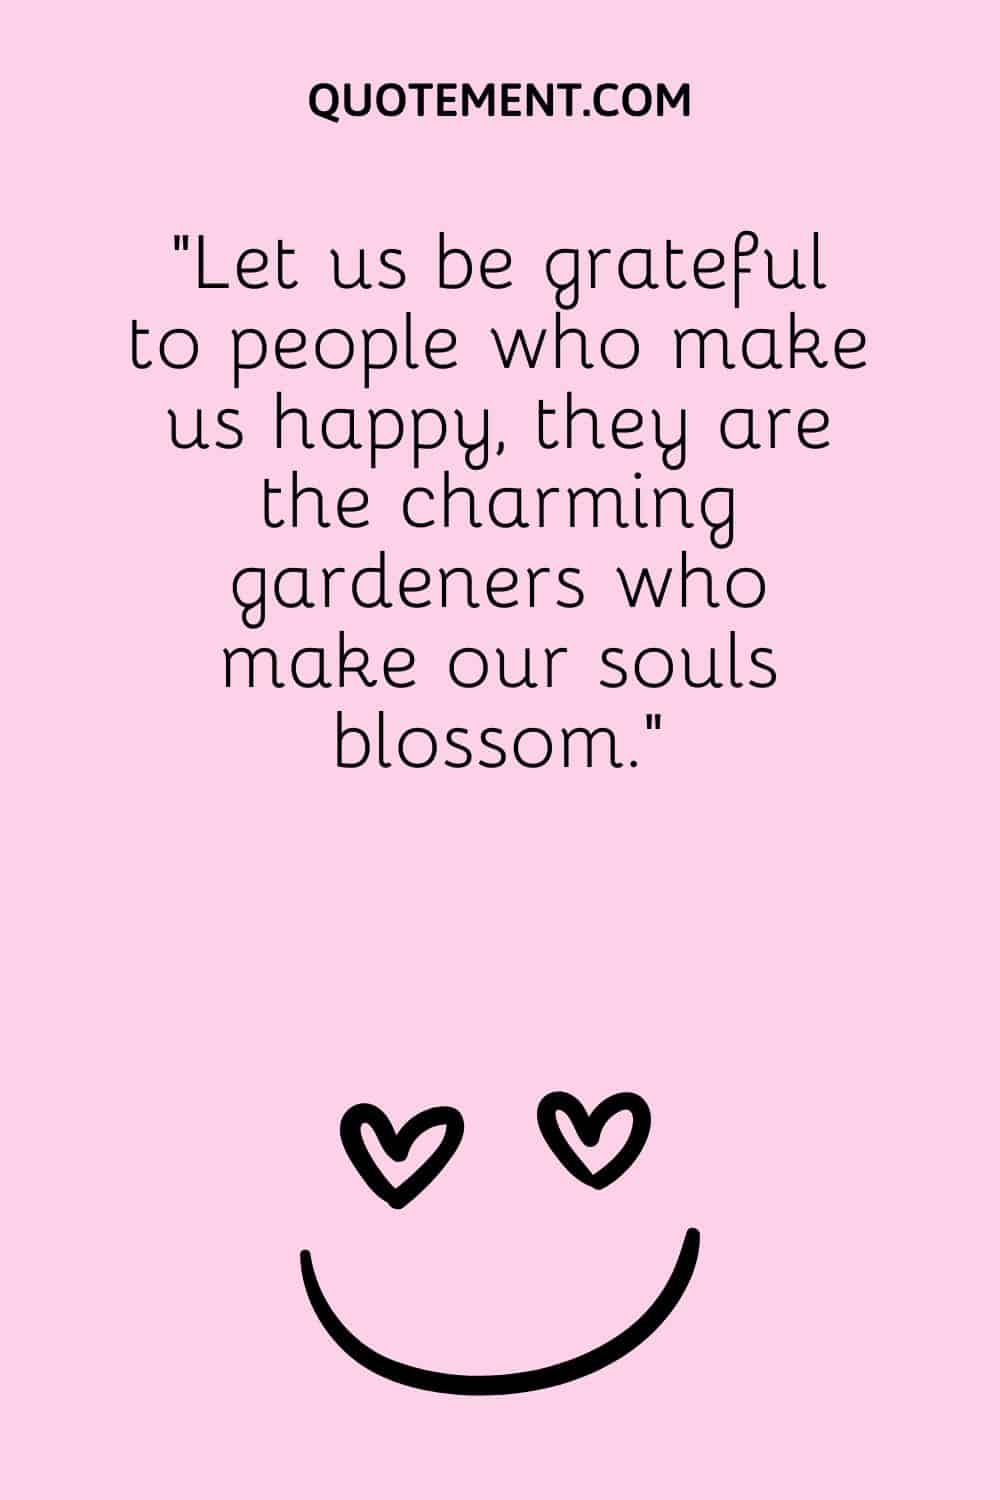 Let us be grateful to people who make us happy, they are the charming gardeners who make our souls blossom